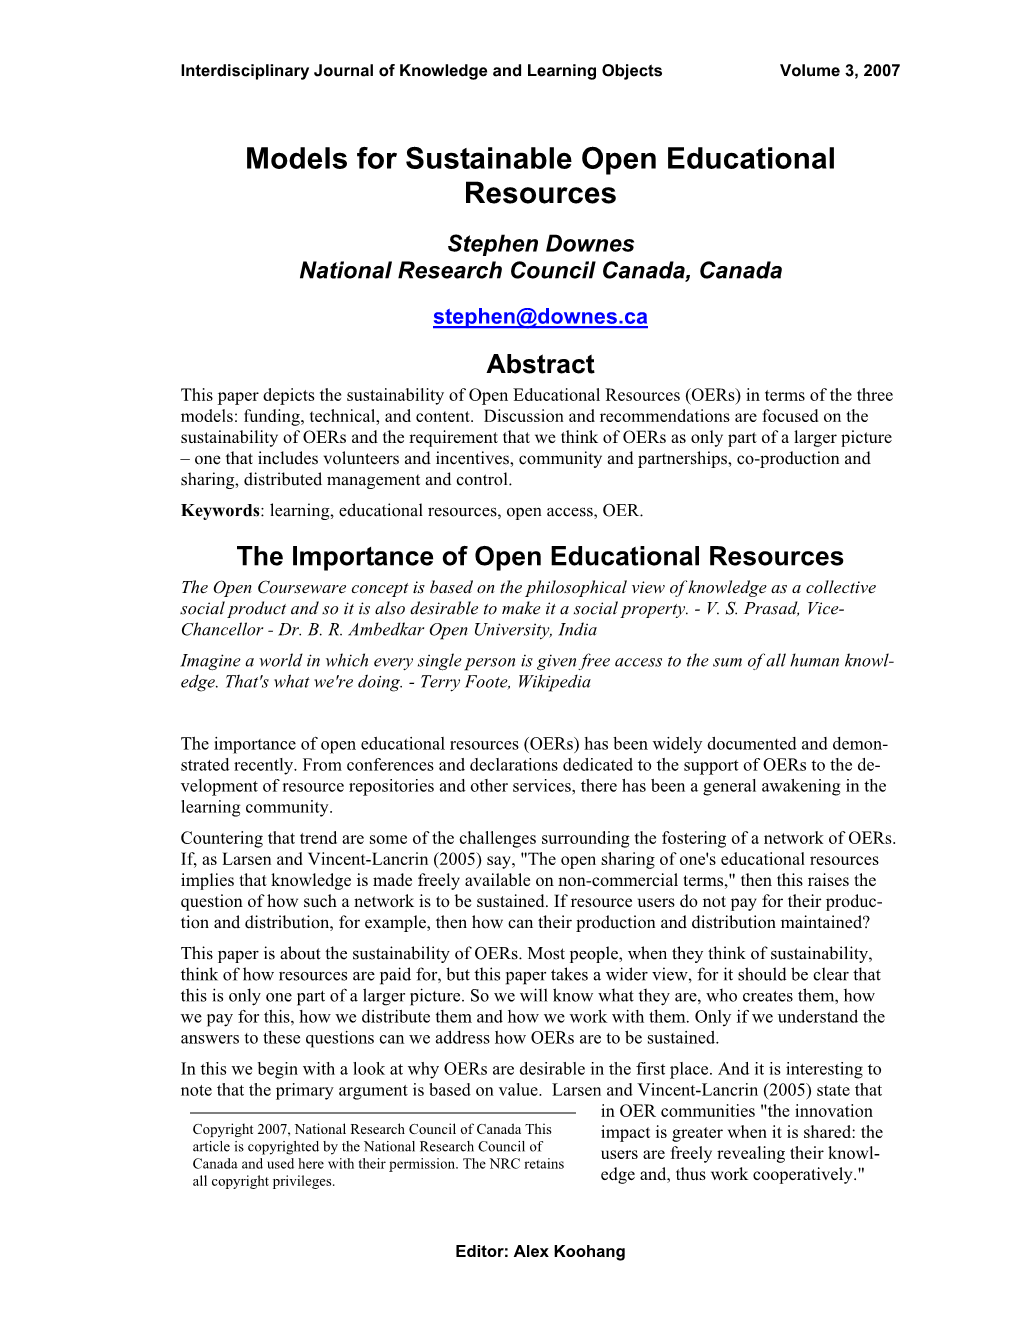 Models for Sustainable Open Educational Resources